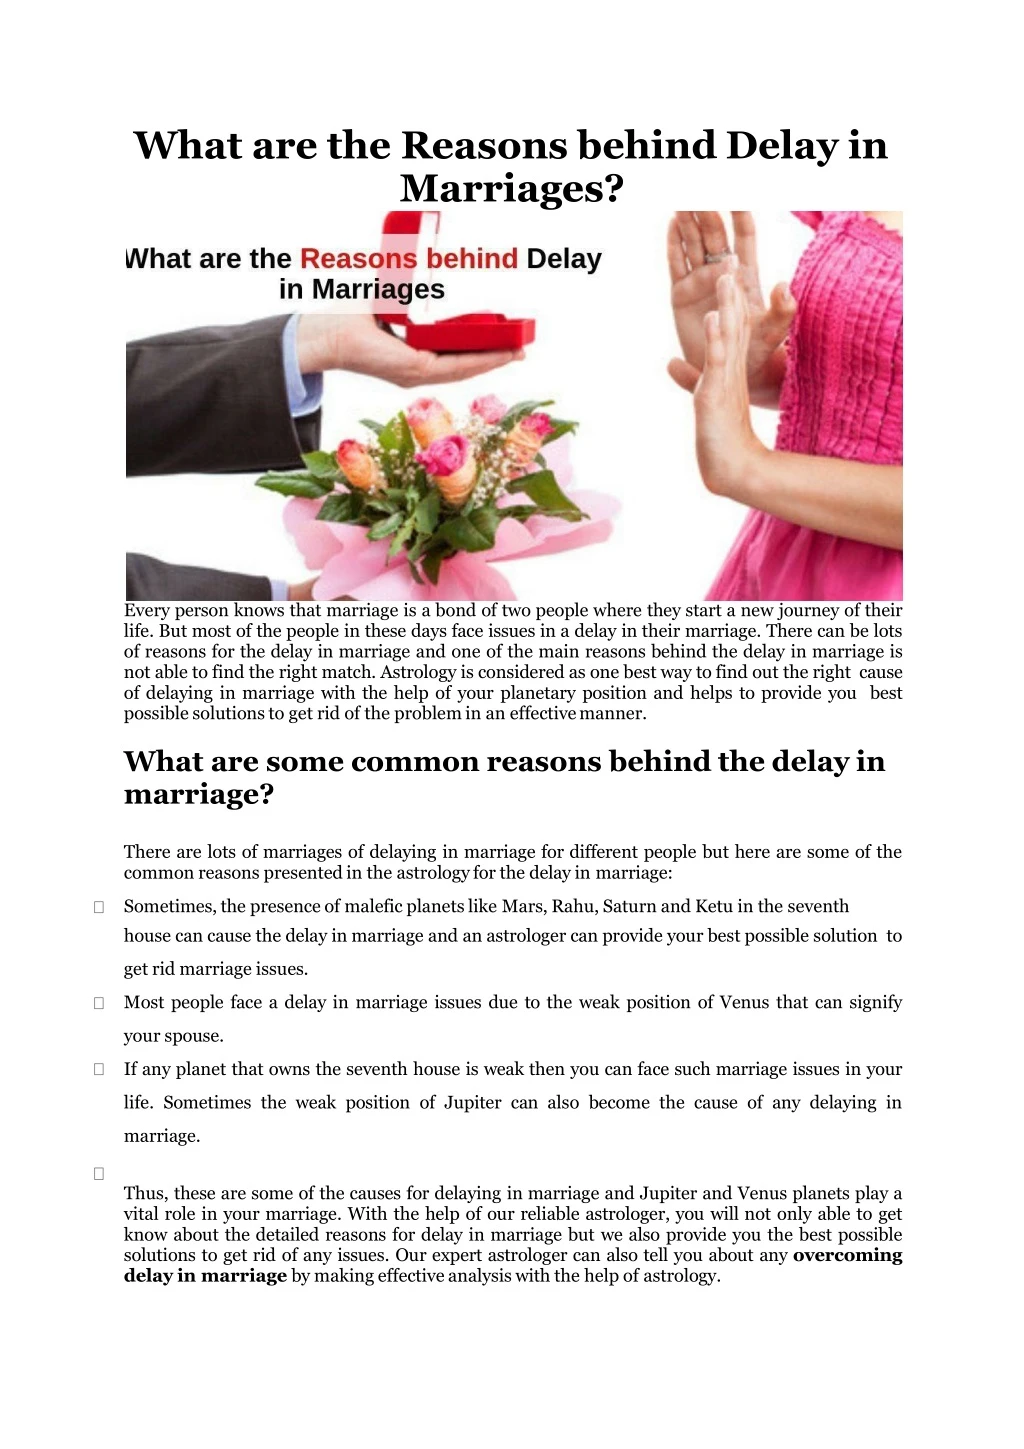 what are the reasons behind delay in marriages